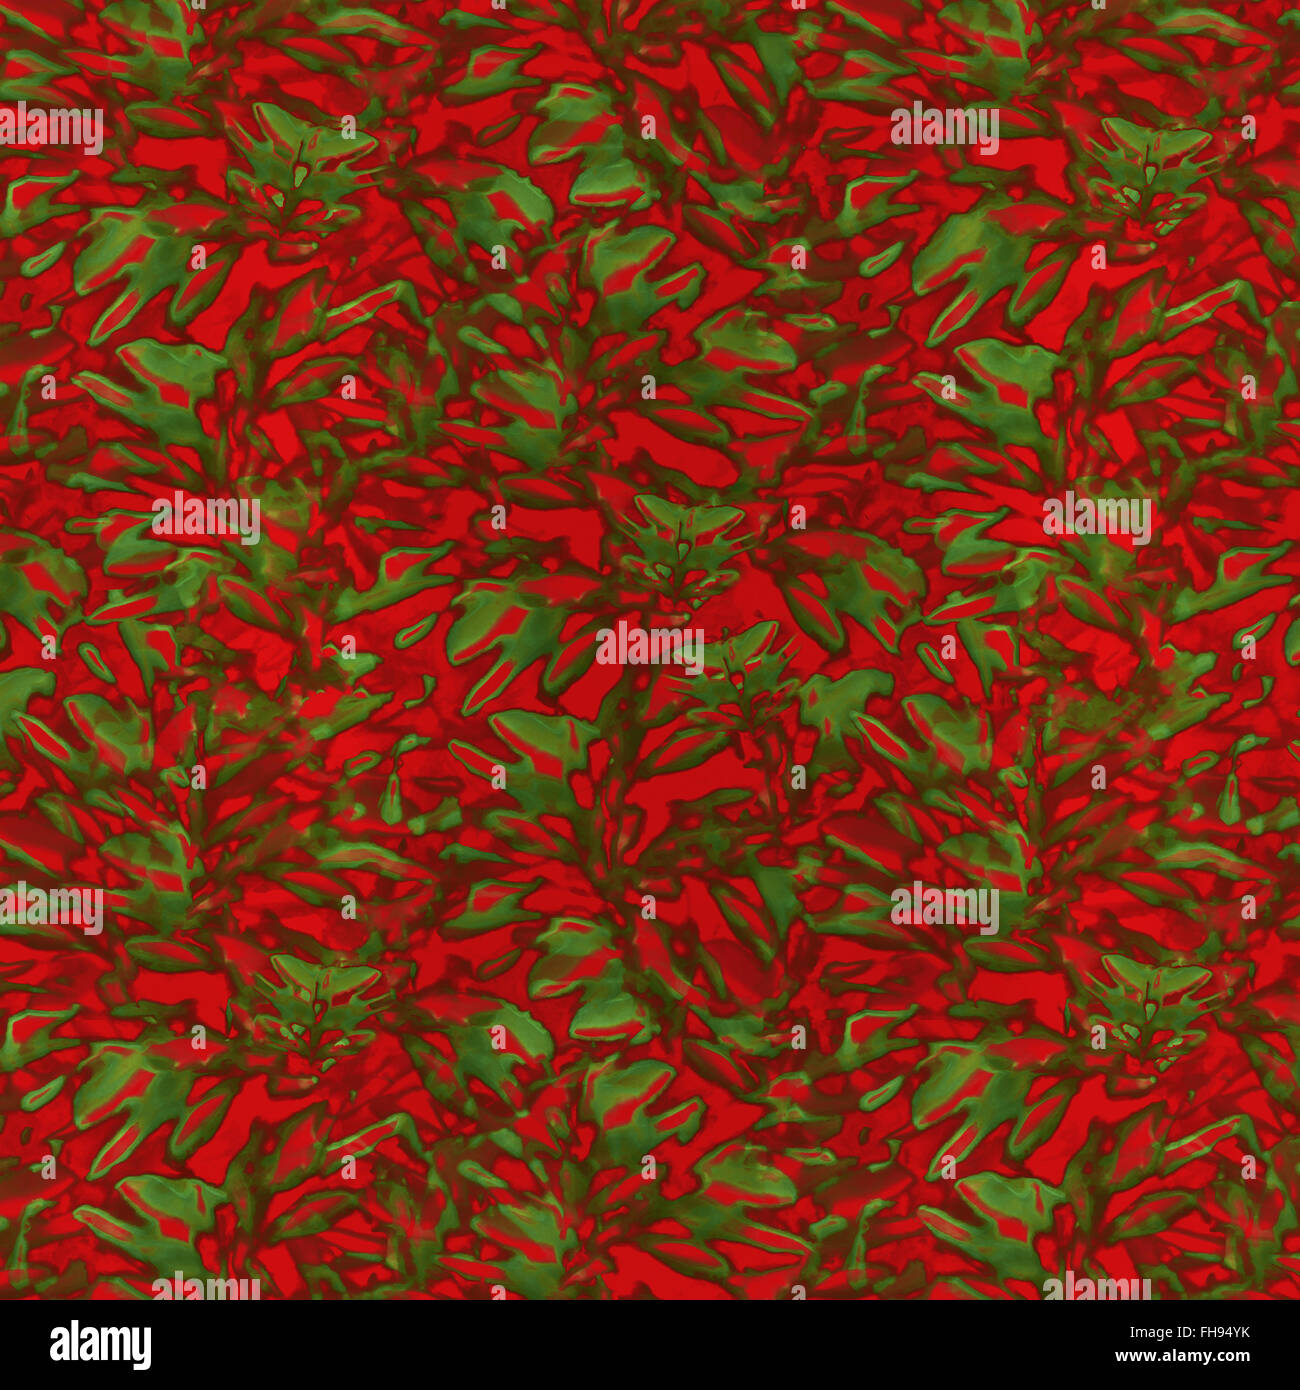 Digital collage technique tropical hawaiian style intricate seamless floral pattern design in vivid red and green colors. Stock Photo